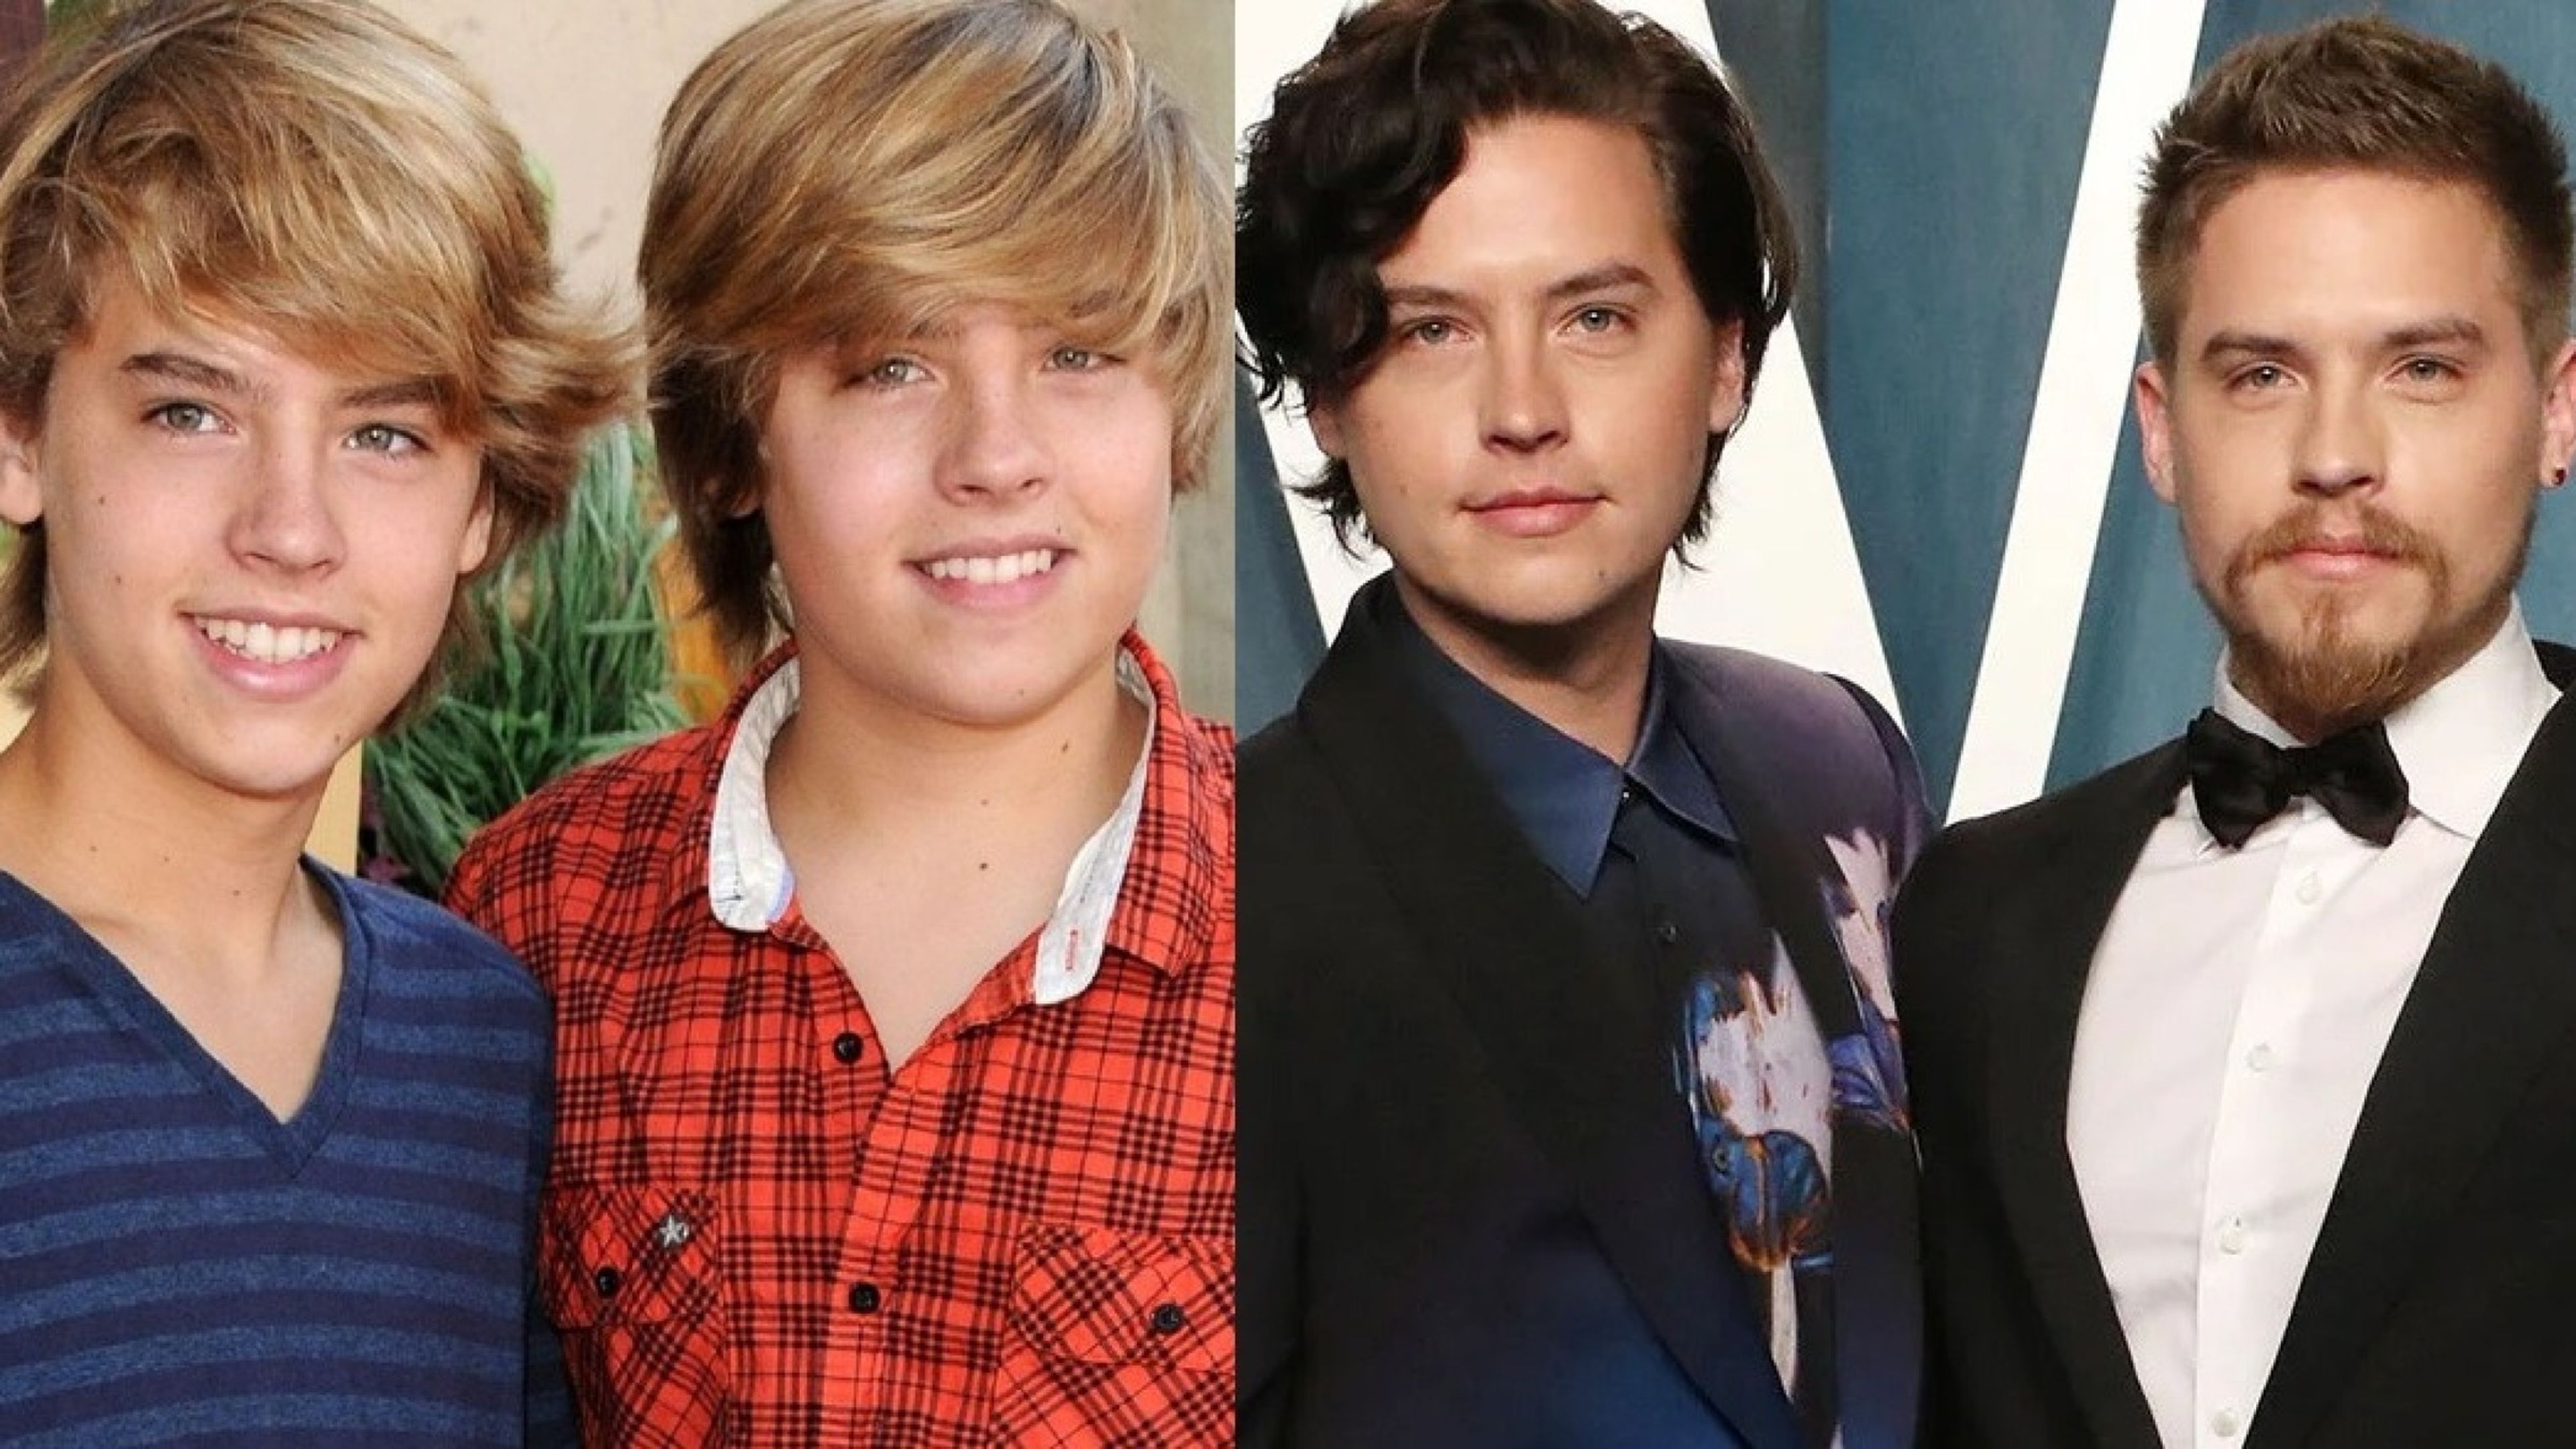 Zack y Cody Dylan y Cole Sprouse